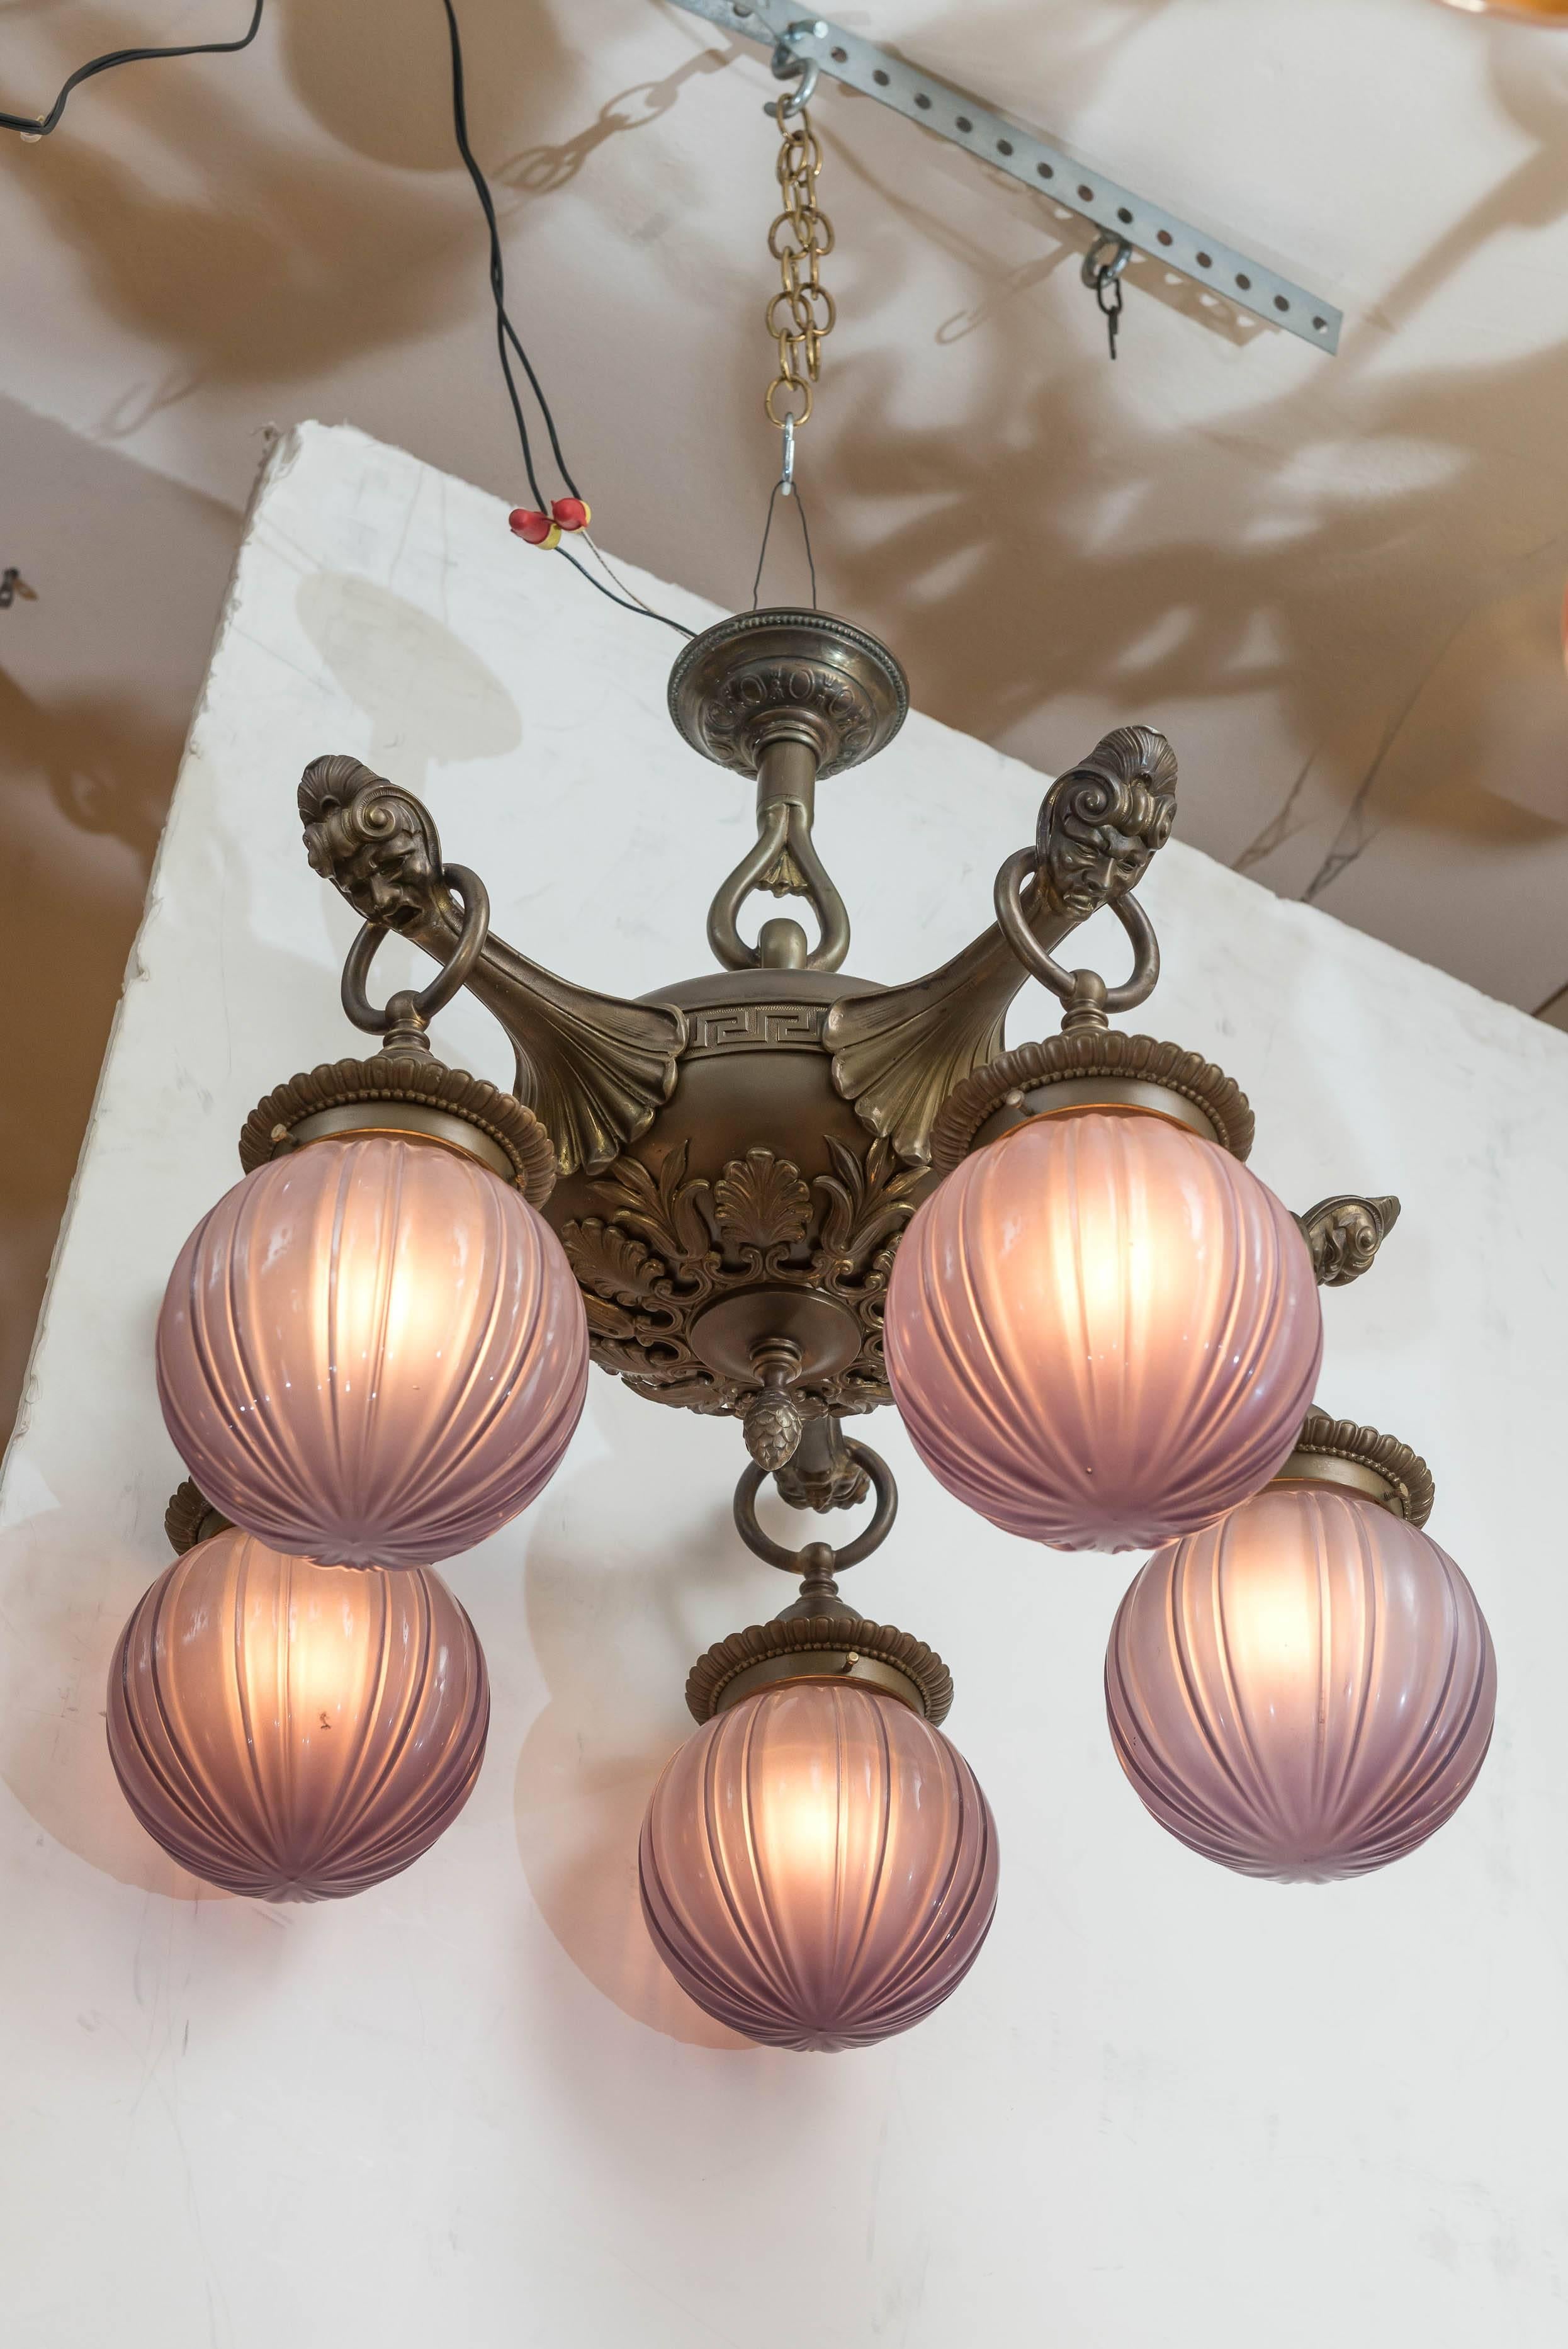 What a neat chandelier we are offering. The body has fleur de lys, and each arm has a face at the tip. The shades are really extraordinary. When the frosted glass is unlit the shades are a very light purple, and lit the purple becomes less